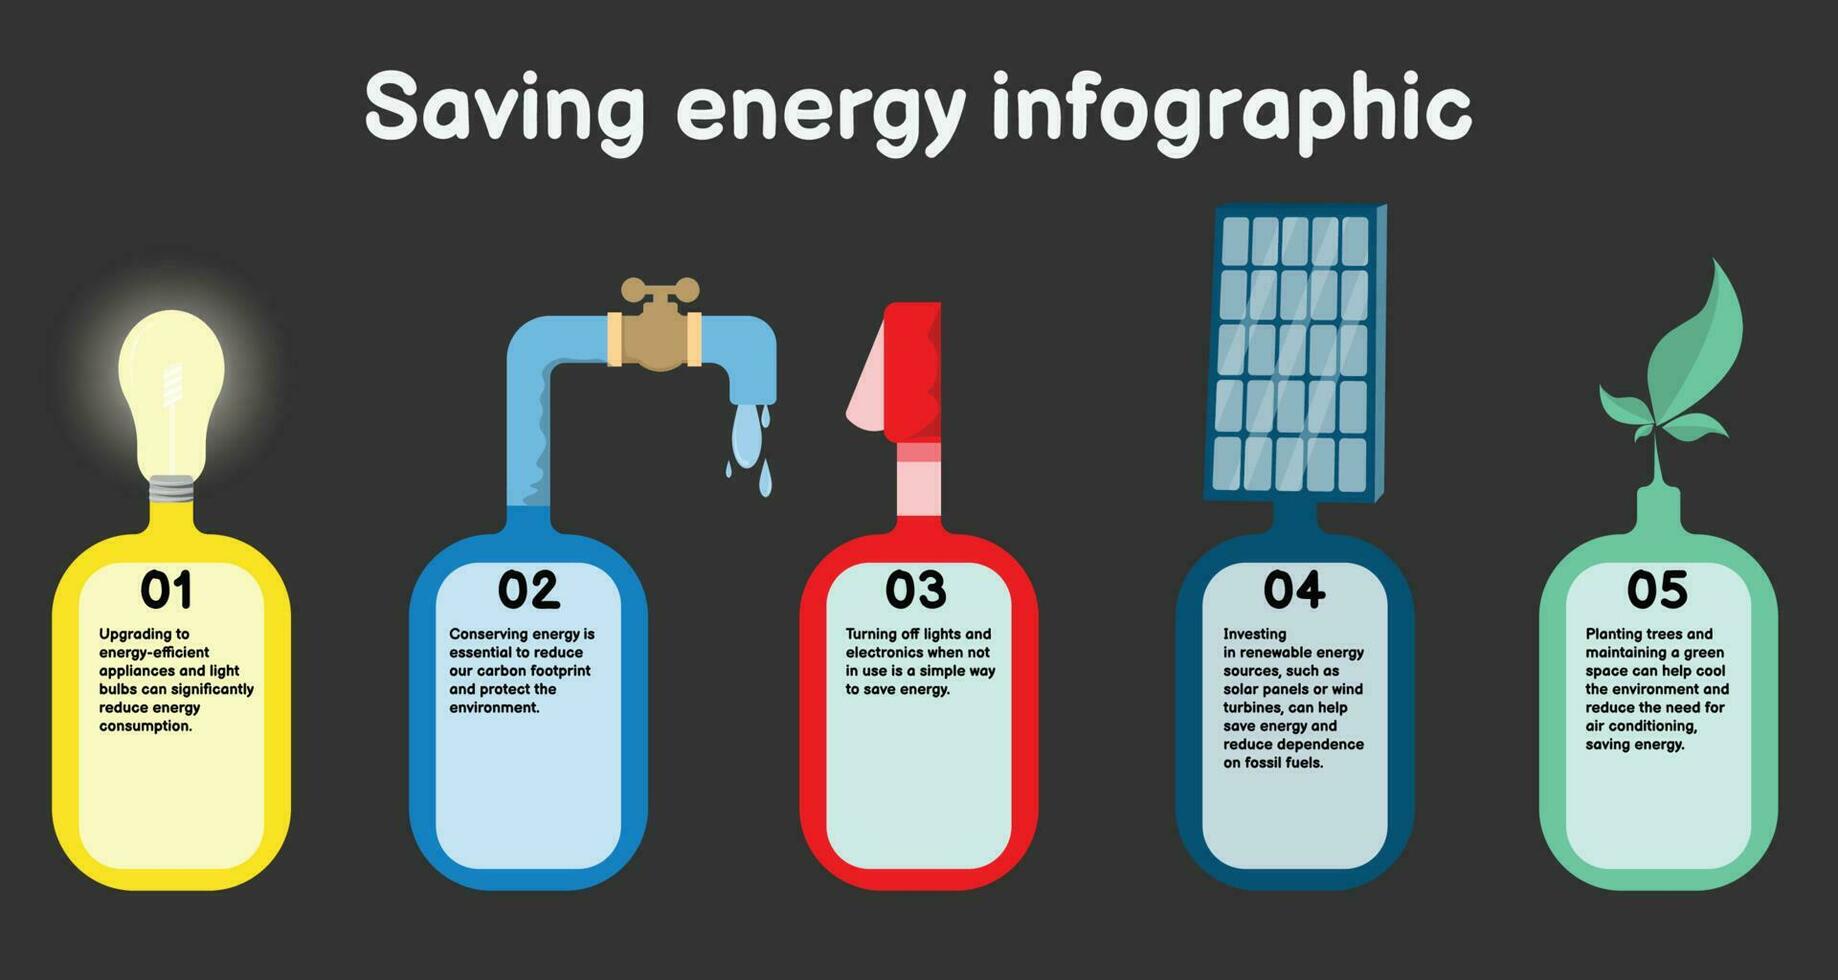 Infographic renewable and saving energy template for energy consumption sustainable information presentation. Vector square and icon. eco modern workflow diagrams. Report plan 5 topics